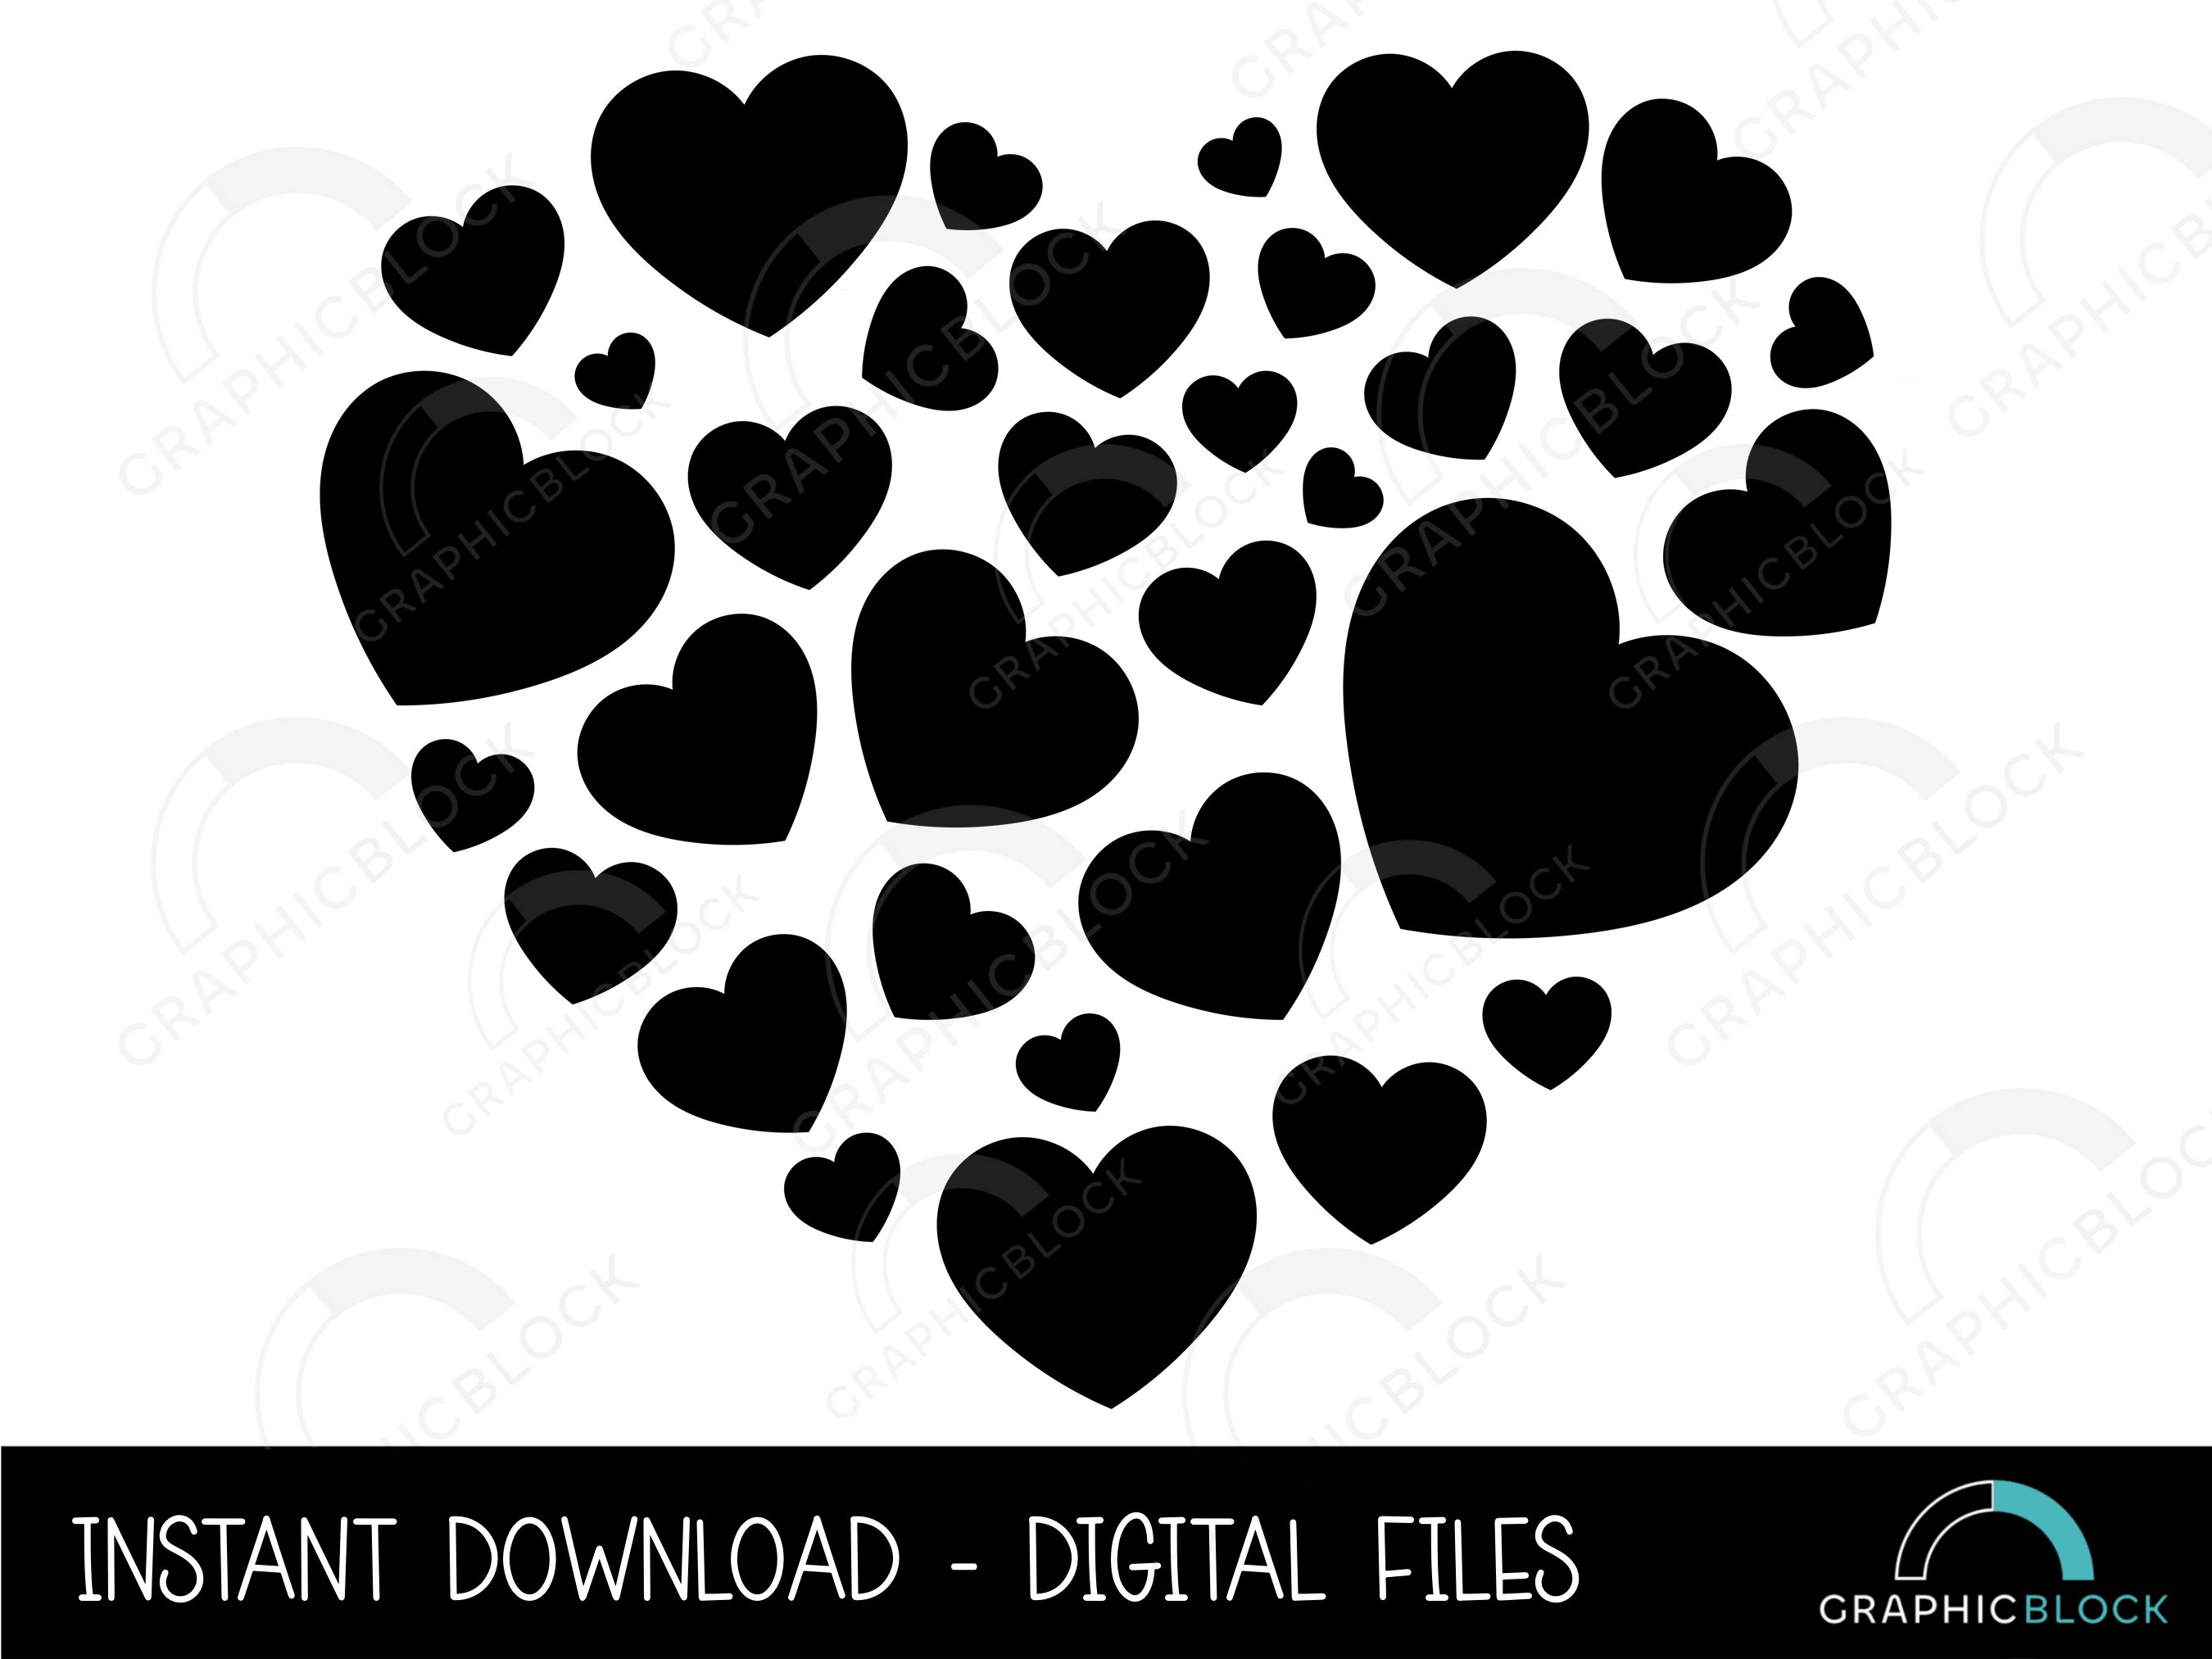 Heart SVG, Heart Shape SVG, Valentine Heart Clipart, Cricut Cut Files,  Hearts Silhouette, Valentines Dxf Png Eps, Vector, Digital Download